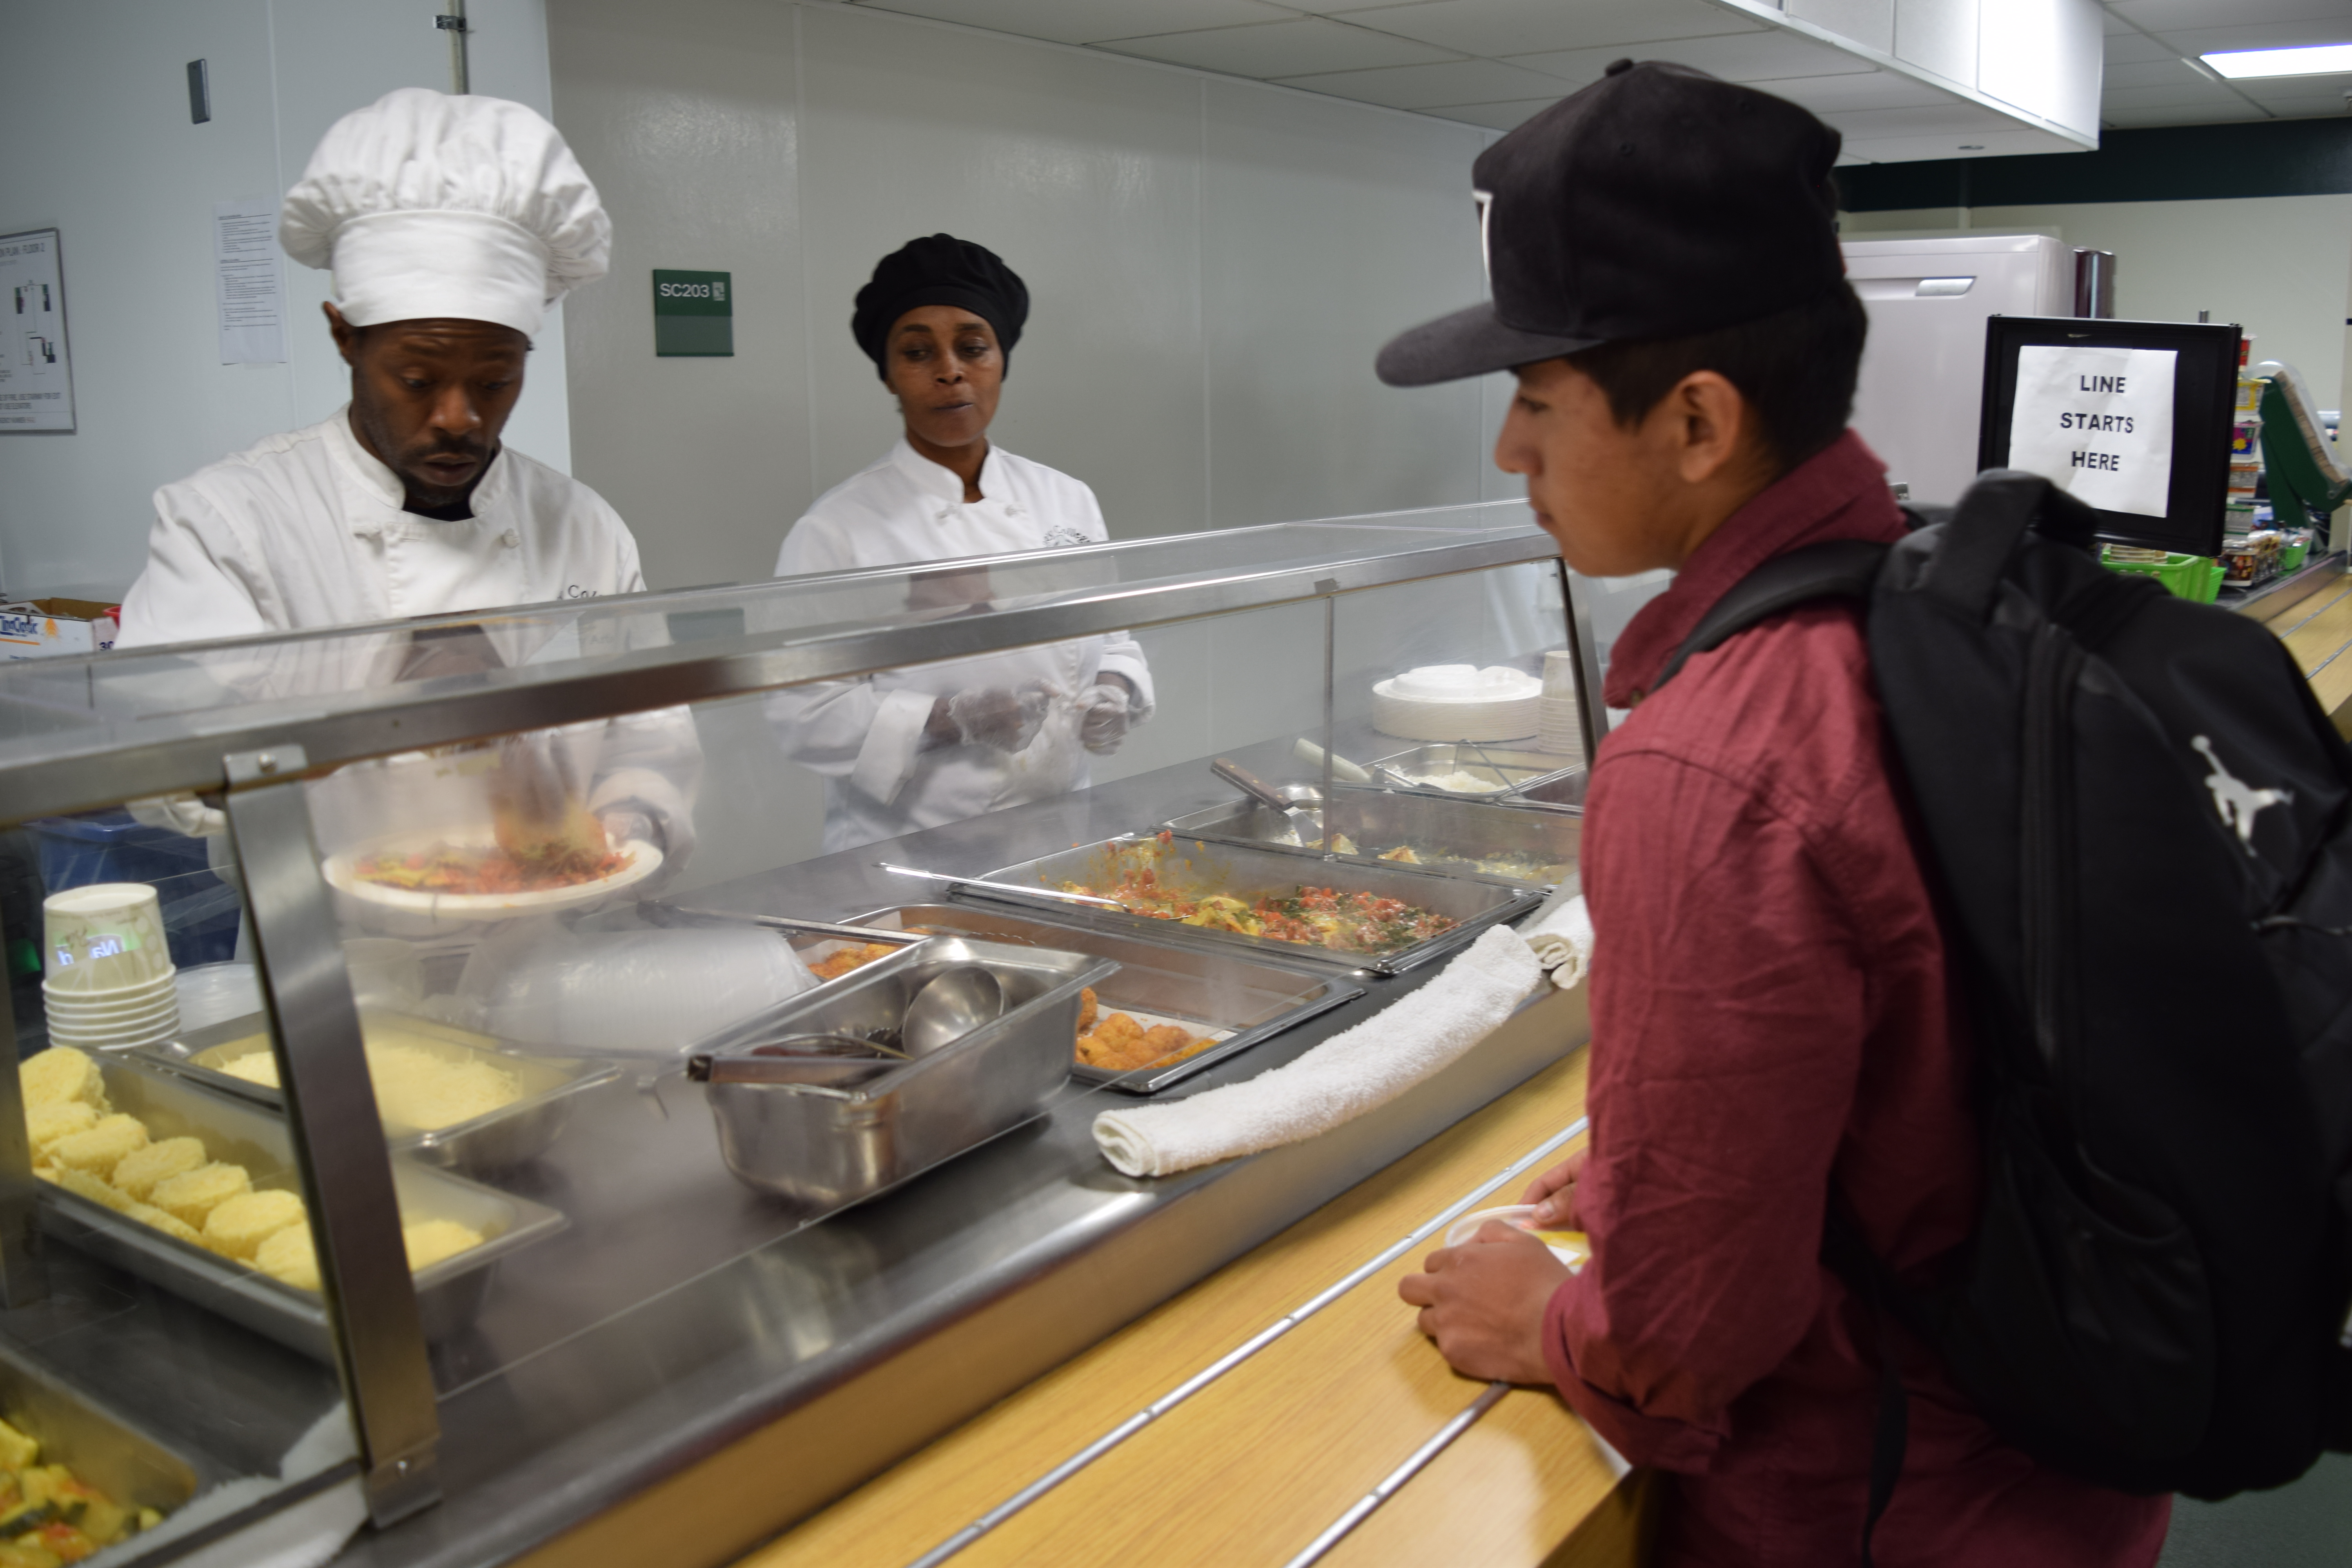 Student Hernandez and culinary student Jabari Shaw under the attentive eyes of another Laney college student Monique Miles. Nov. 29, 2017. (Photo by Barbara Muniz)